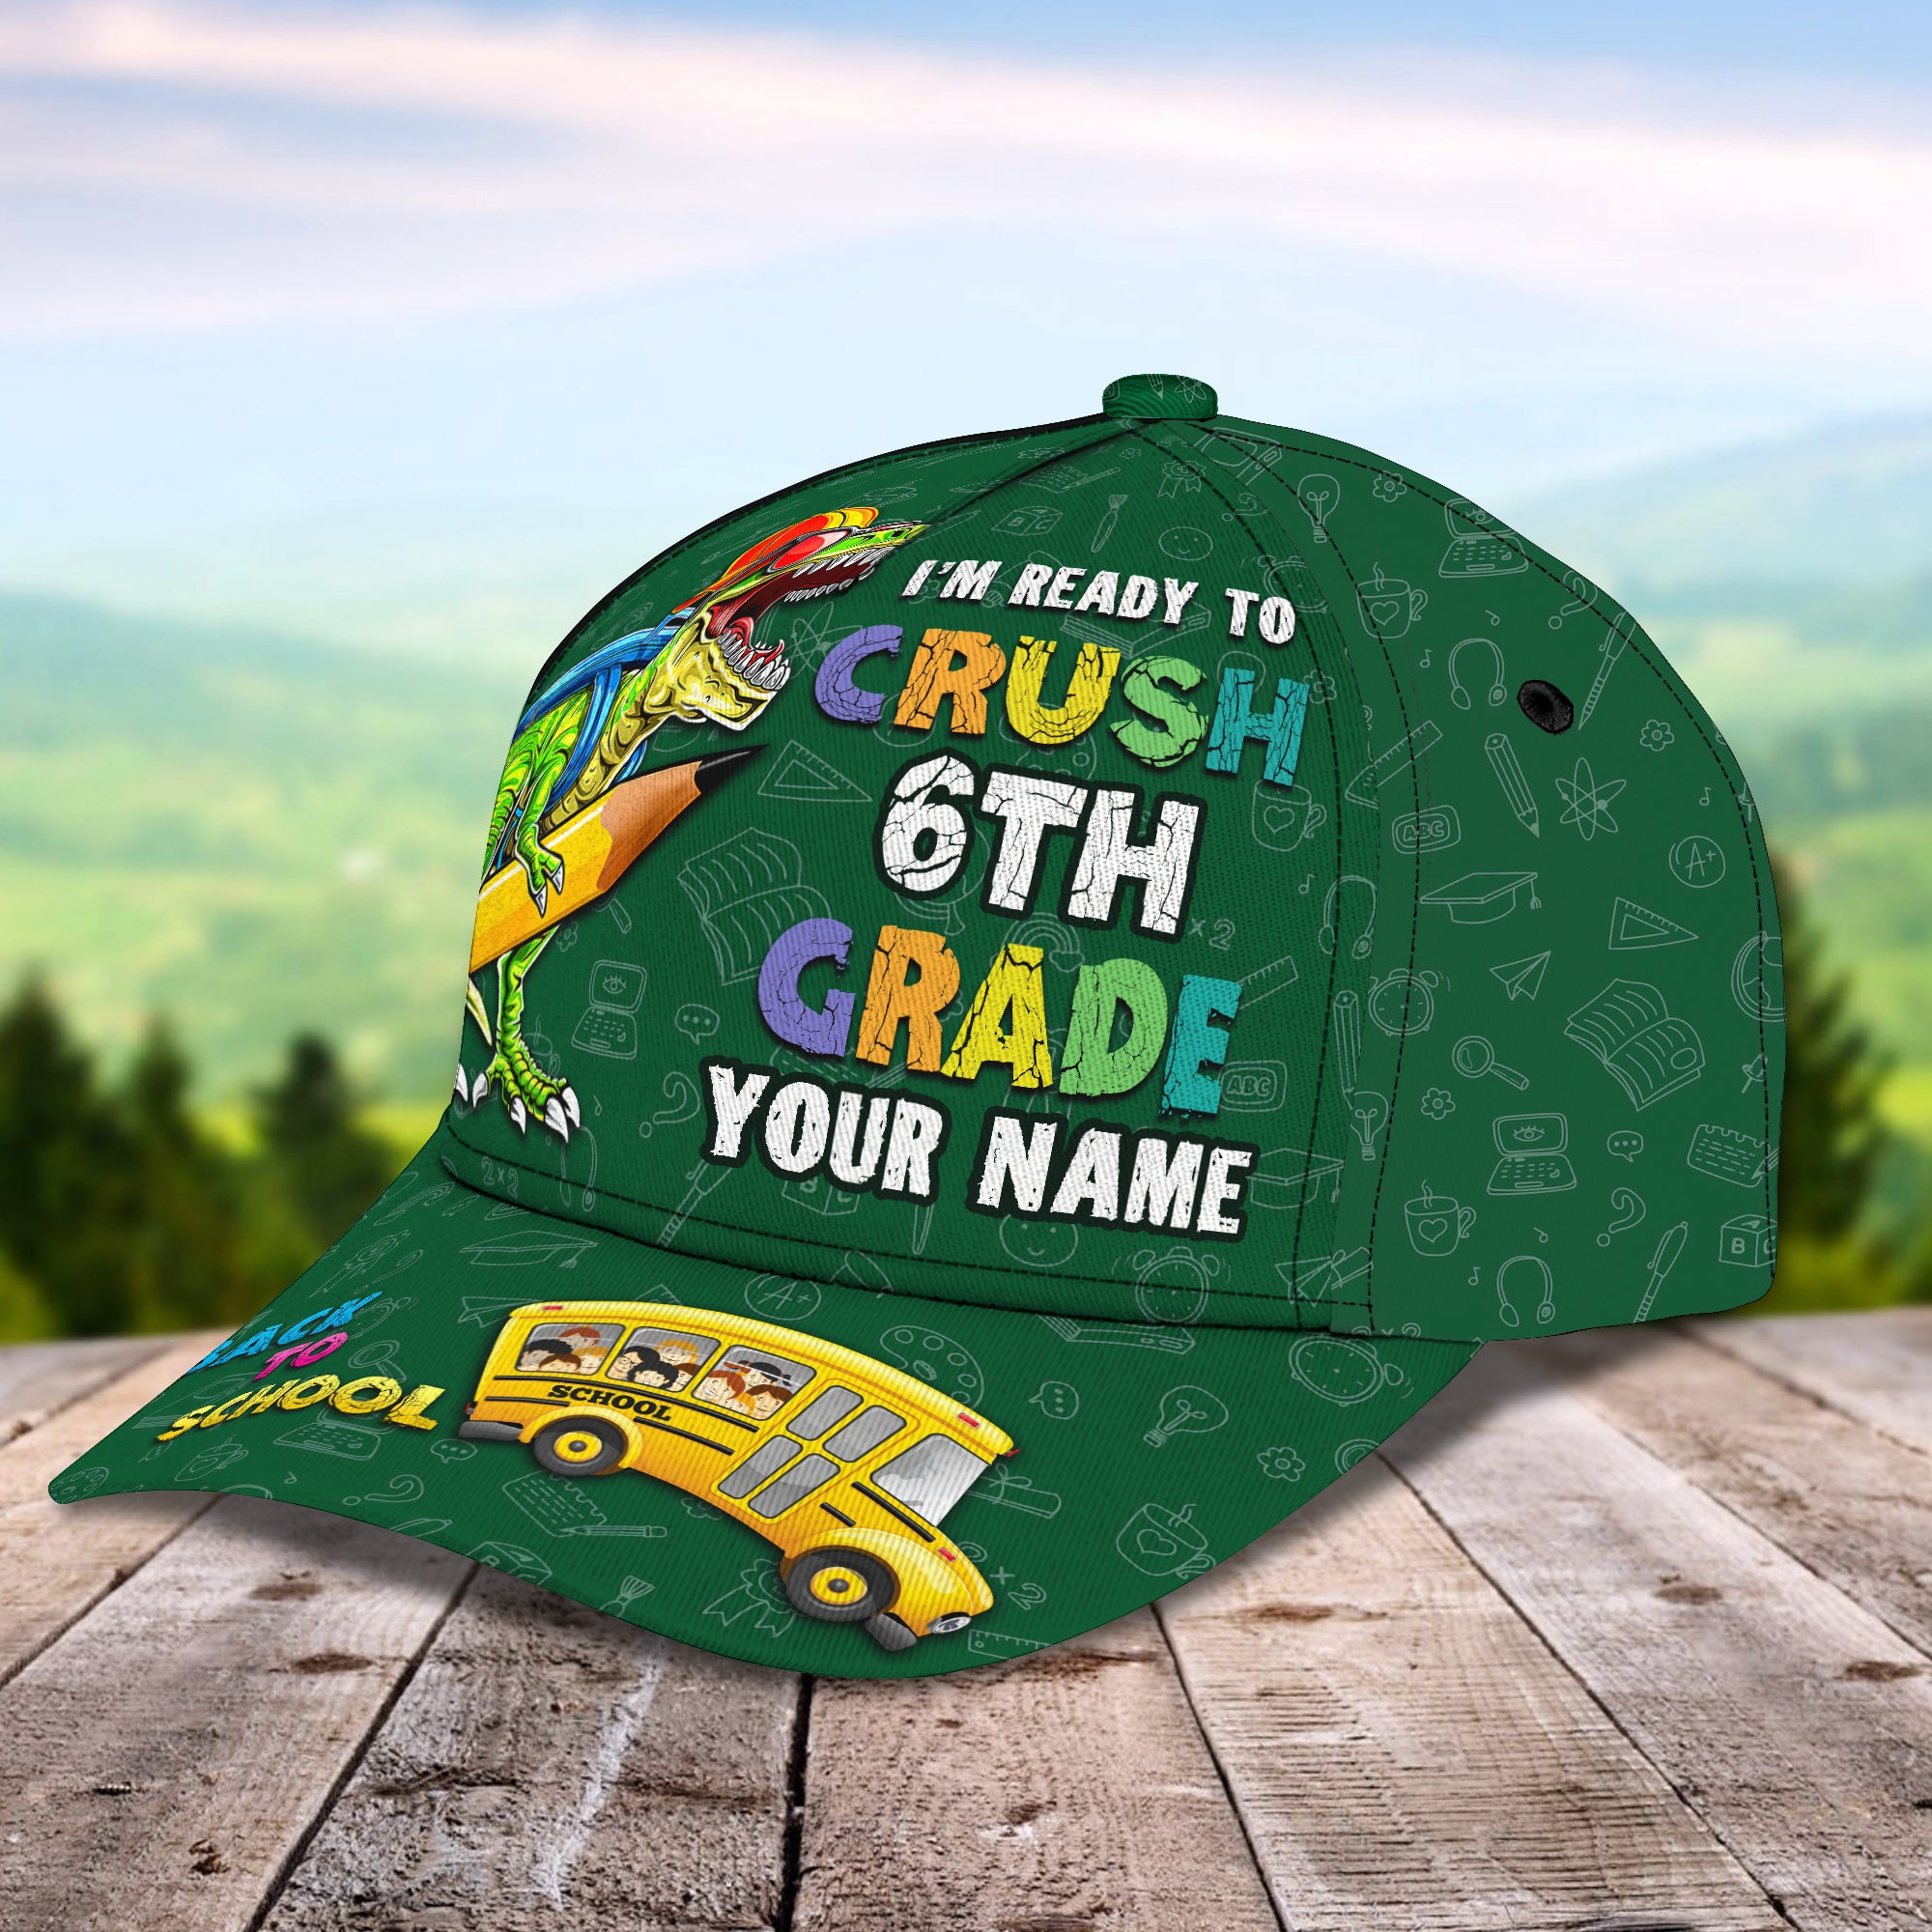 Back To School 01 - Personalized Name Cap - TD97